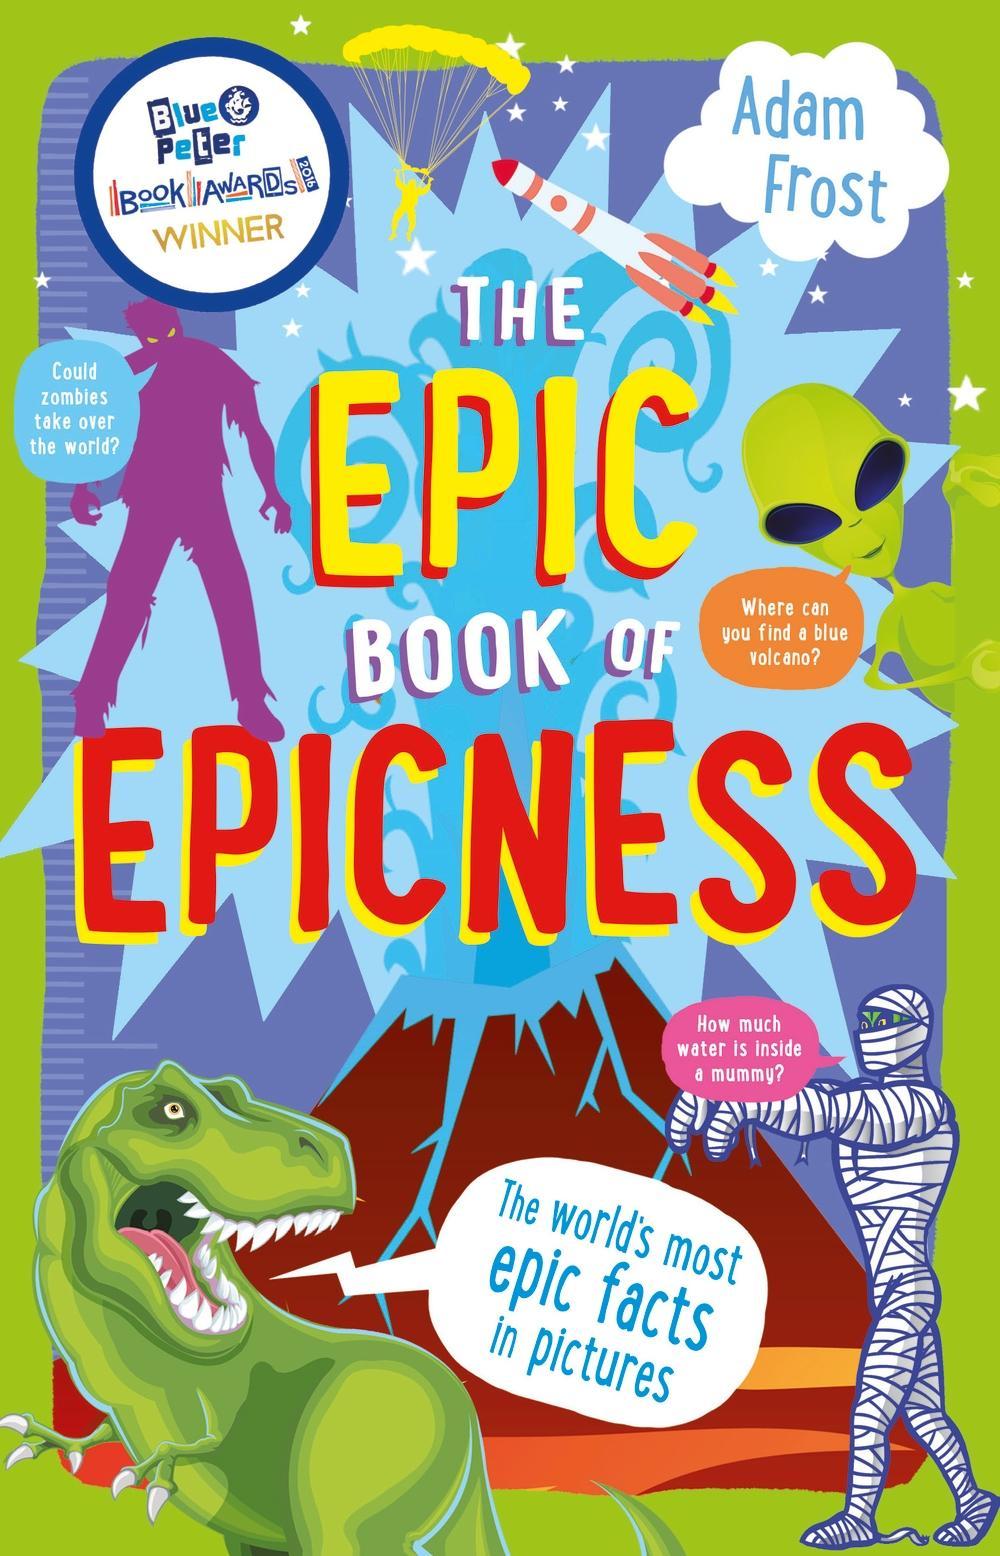 Epic Book of Epicness